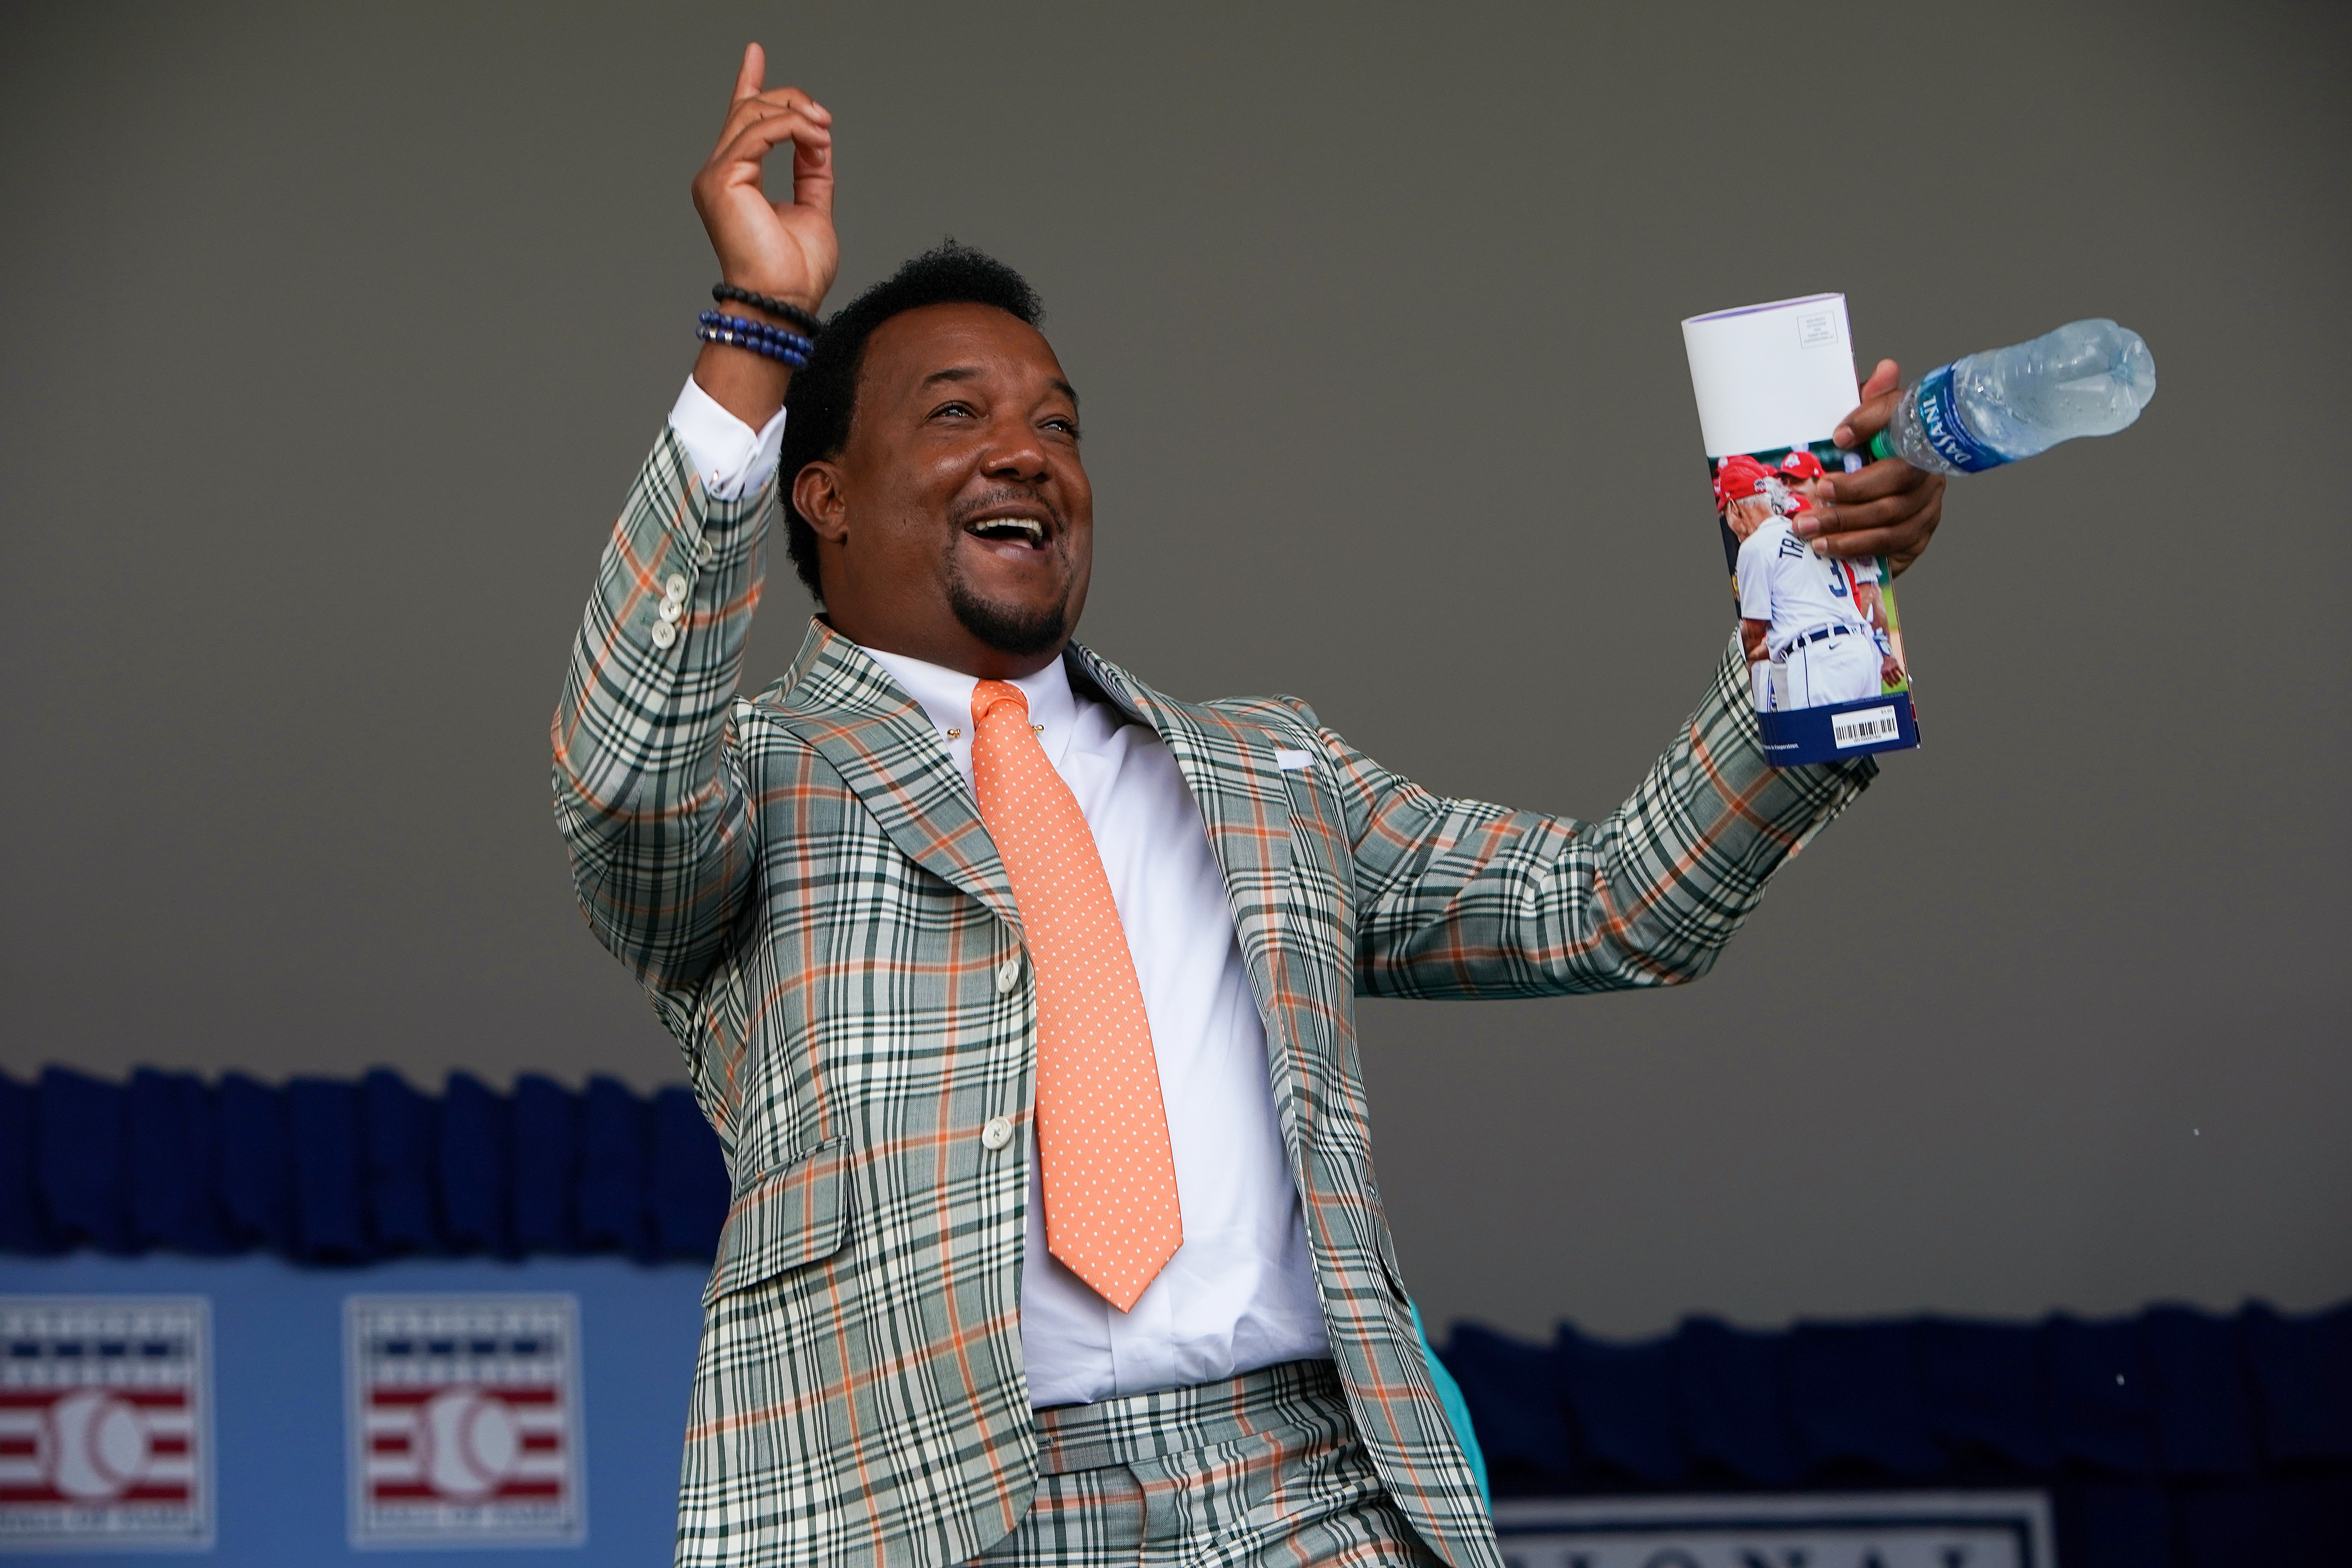 Red Sox notebook: Pedro Martinez wants baseball back in Montreal – Boston  Herald